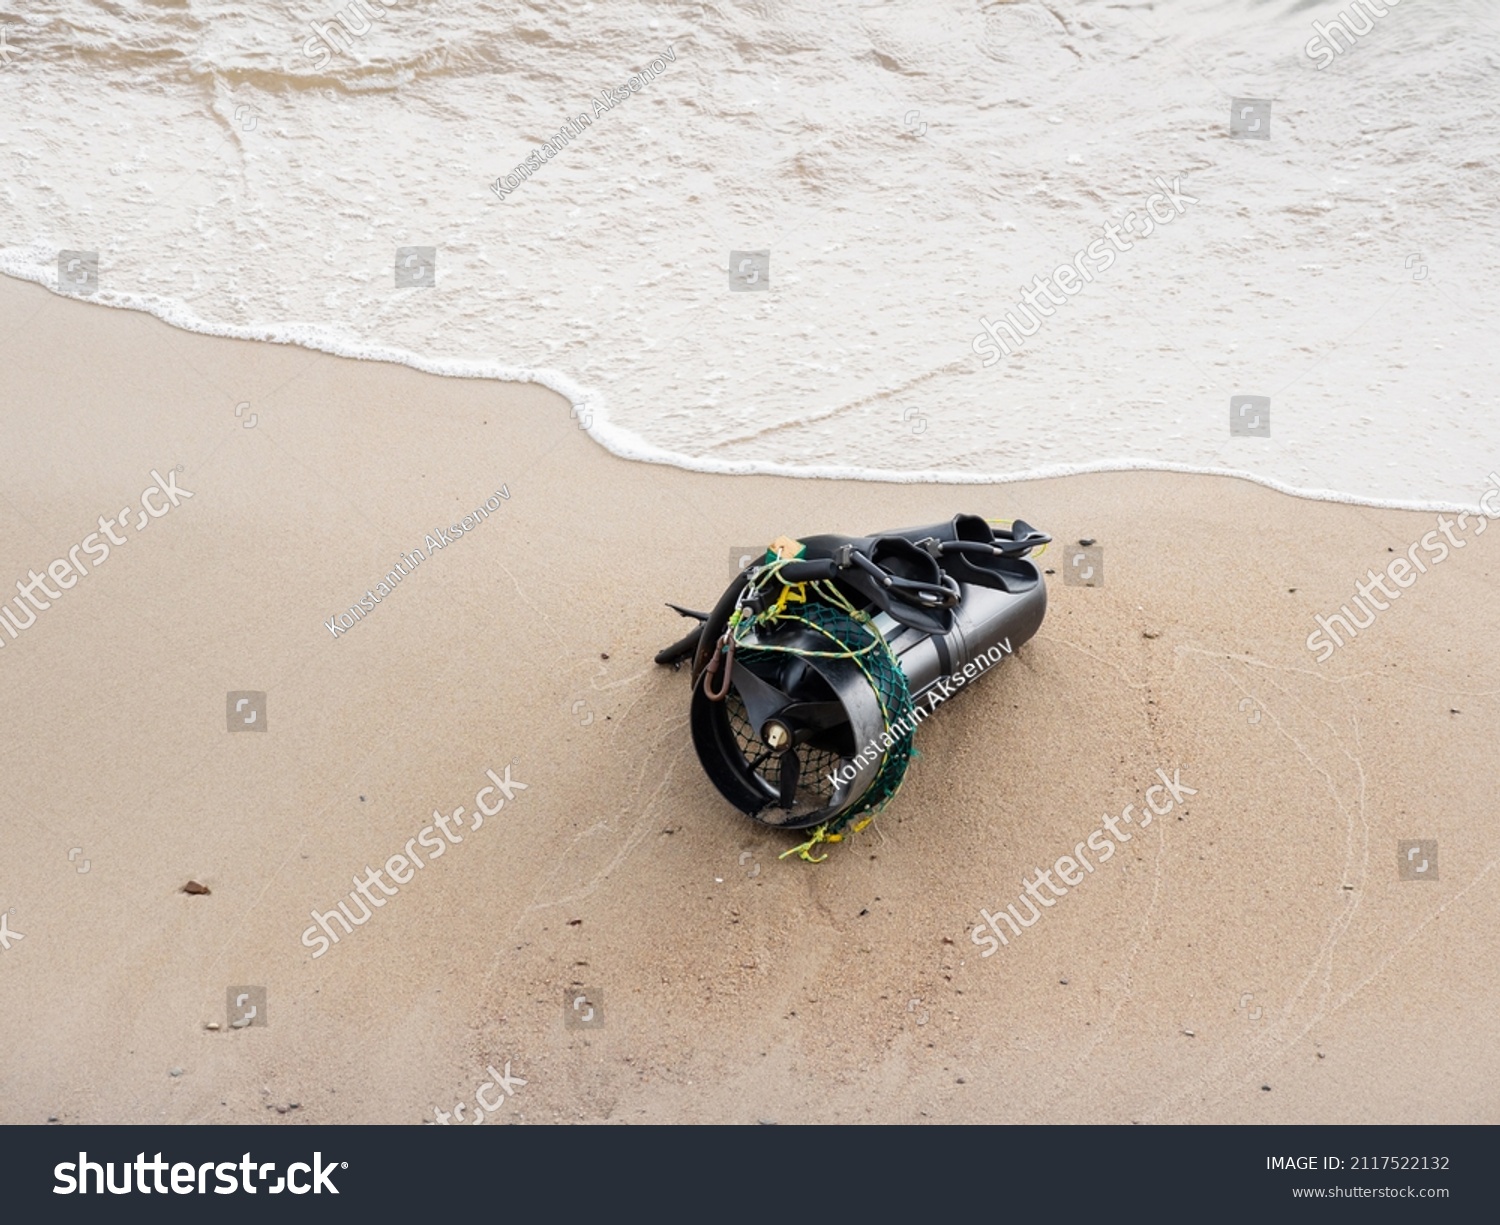 Diver's equipment on sea coast. Rubber flippers and diver propulsion vehicle. Black underwater scooter or swimmer delivery vehicle on sandy beach near sea surf.  #2117522132